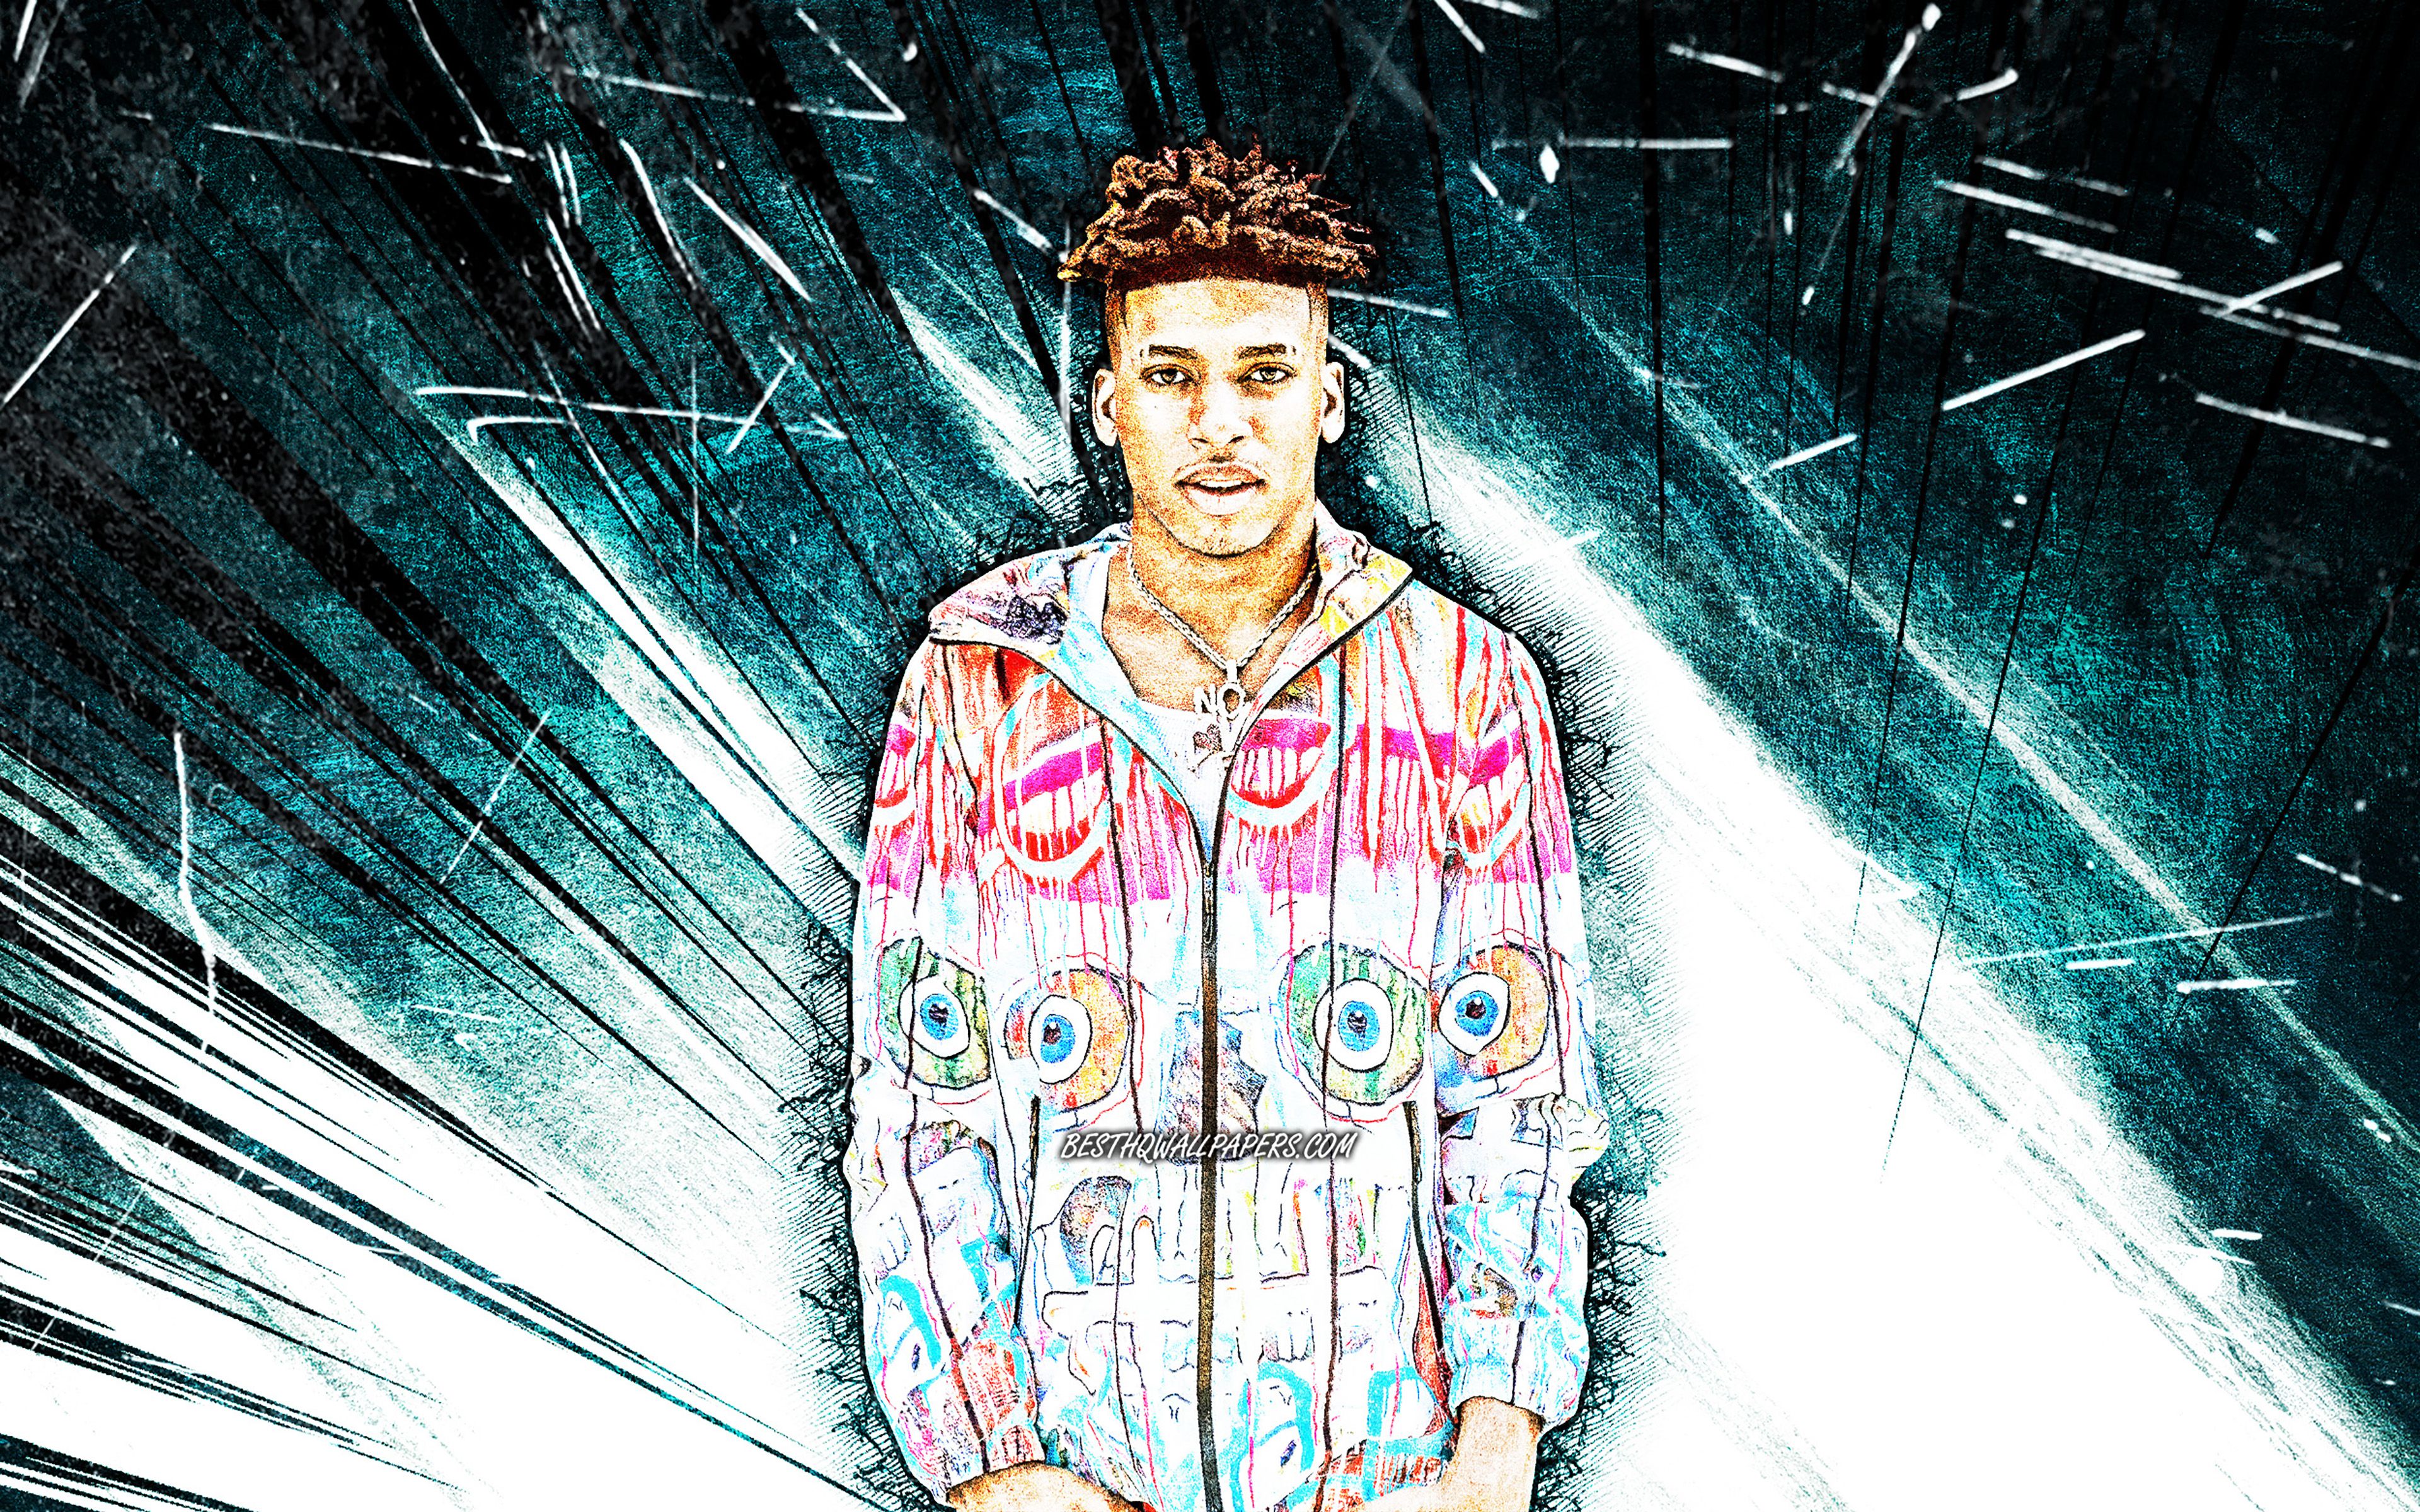 Download wallpaper 4k, NLE Choppa, grunge art, american rapper, music stars, Bryson Lashun Potts, american celebrity, blue abstract rays, NLE Choppa 4K for desktop with resolution 3840x2400. High Quality HD picture wallpaper